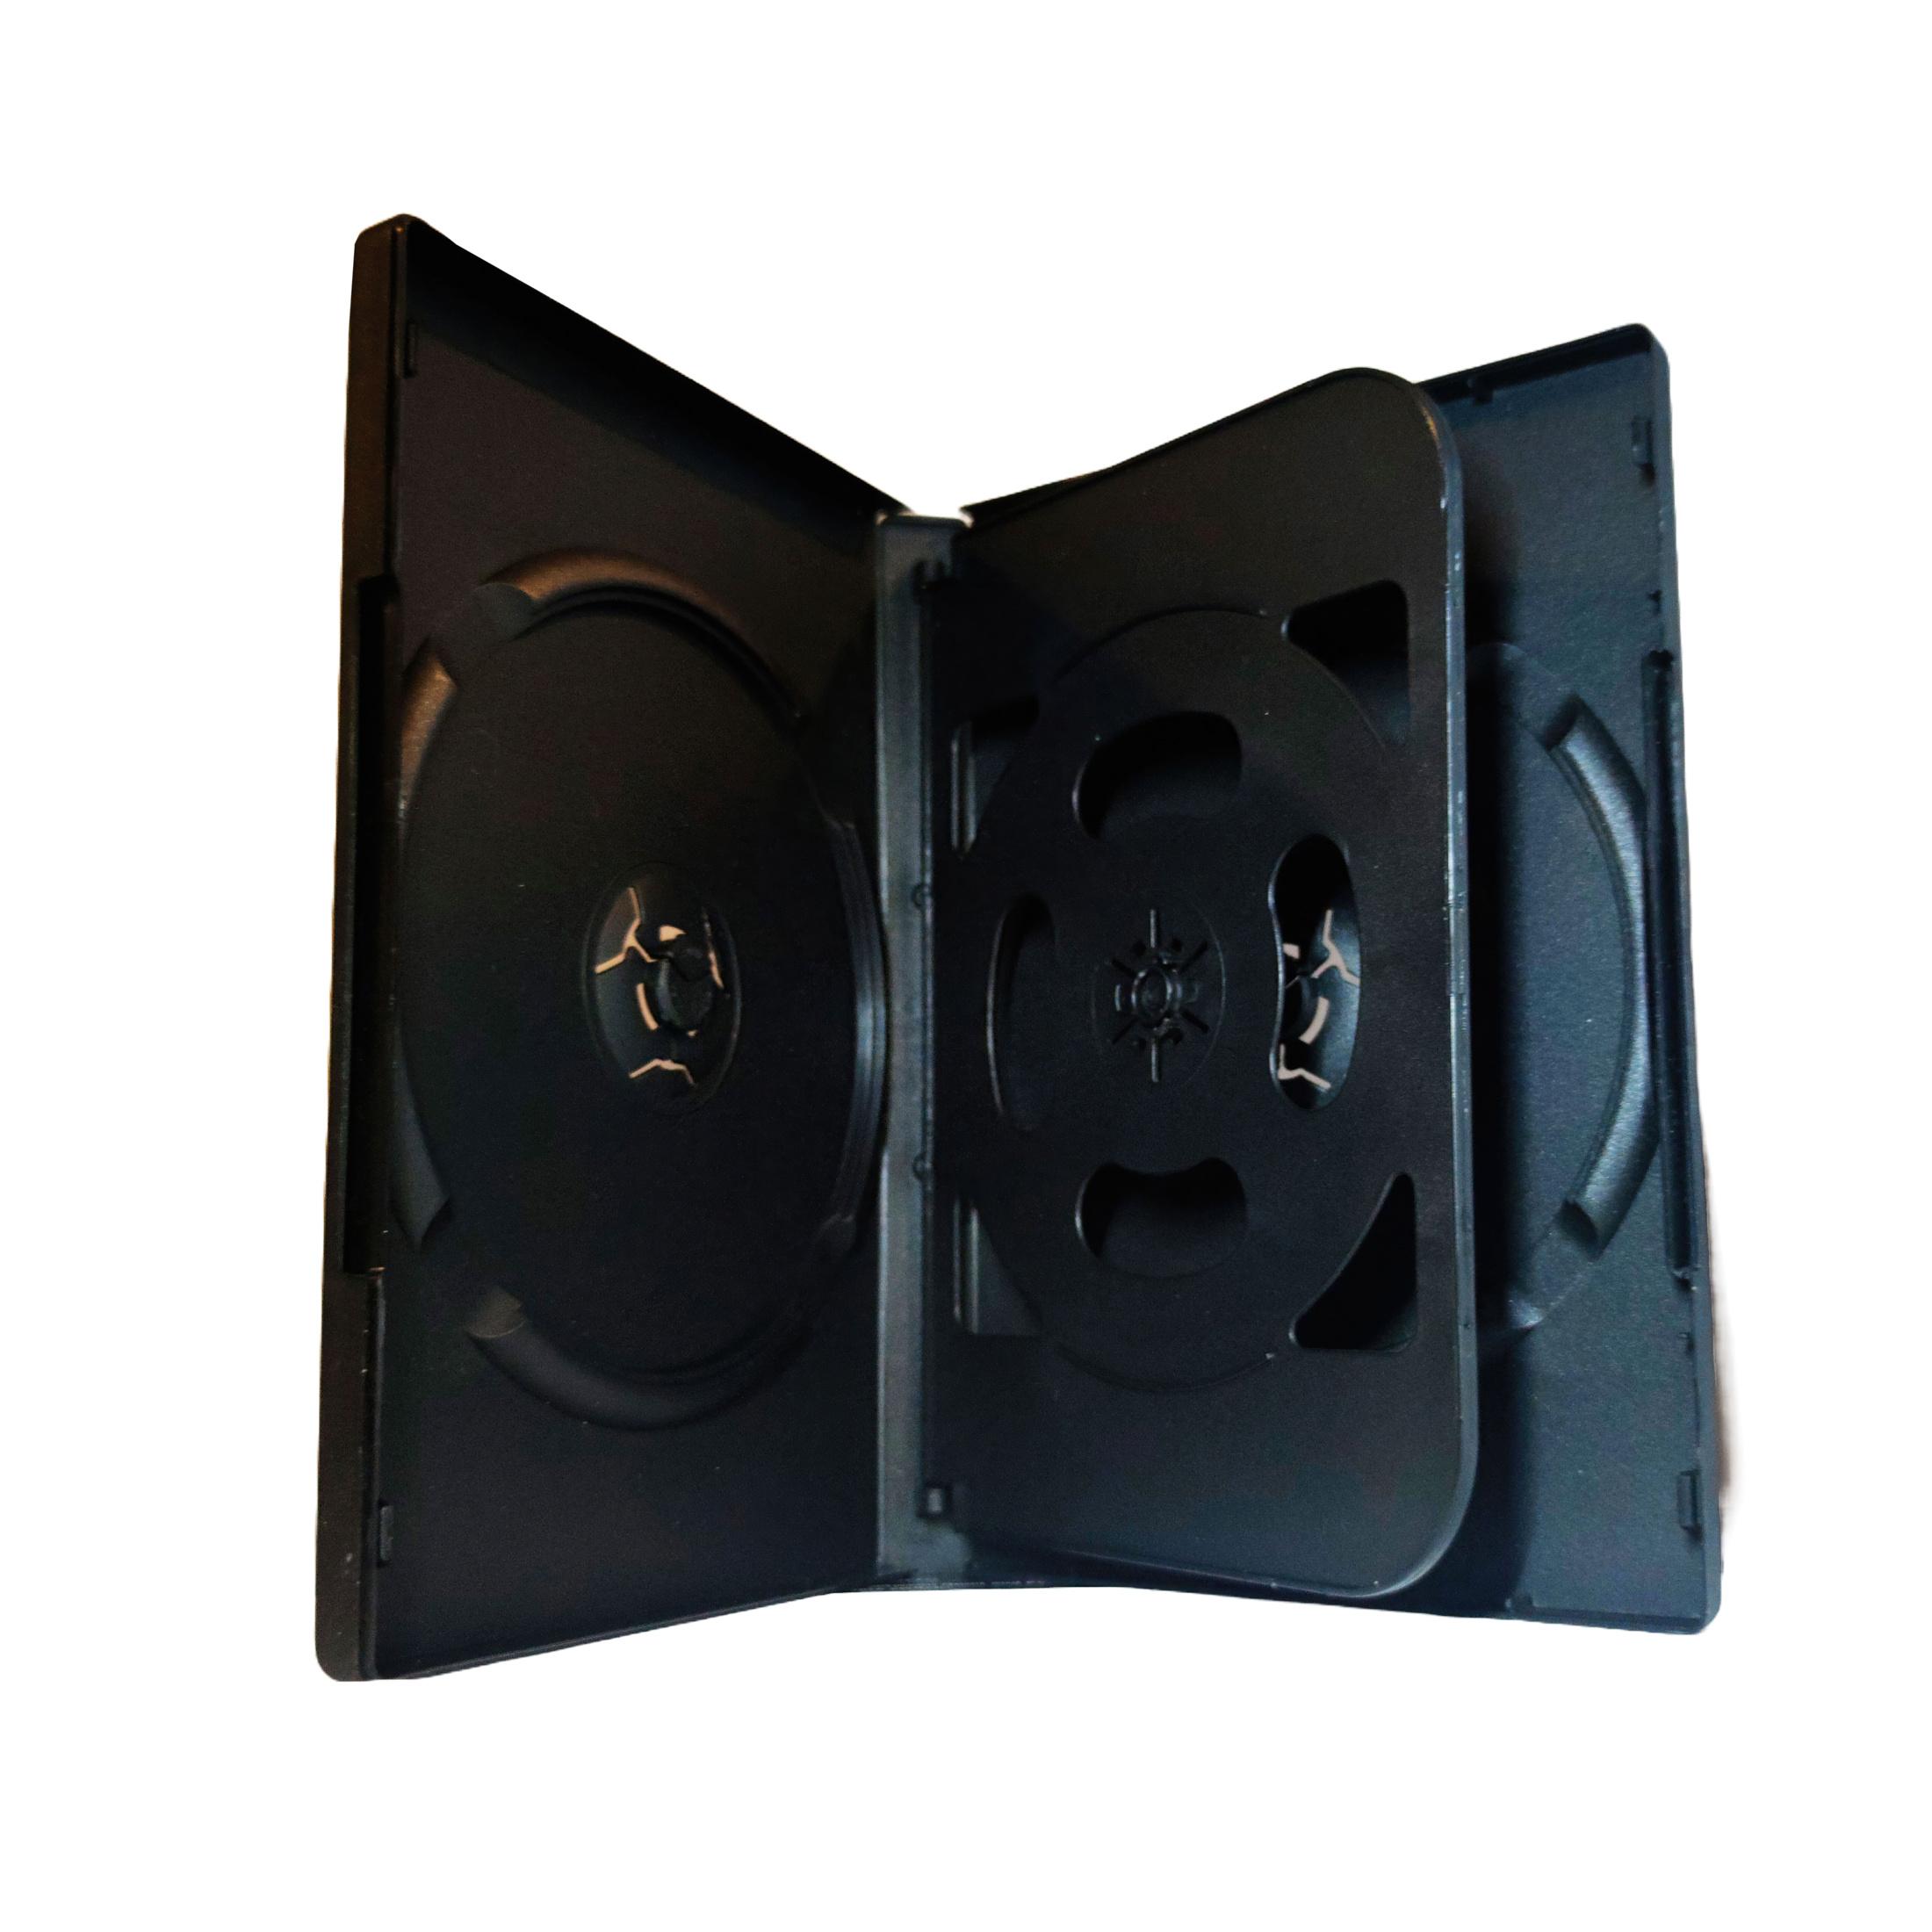 COVER IT Box: 4 DVD 19mm Black - Pack of 3